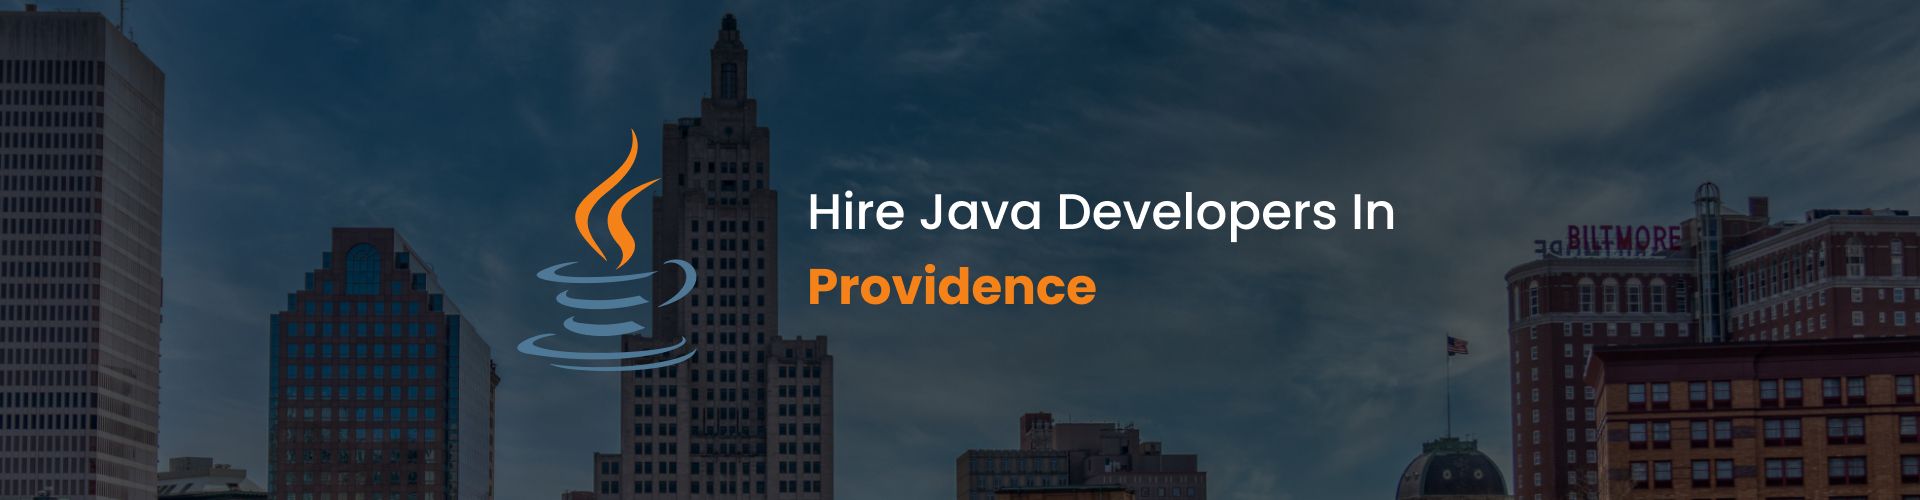 hire java developers in providence